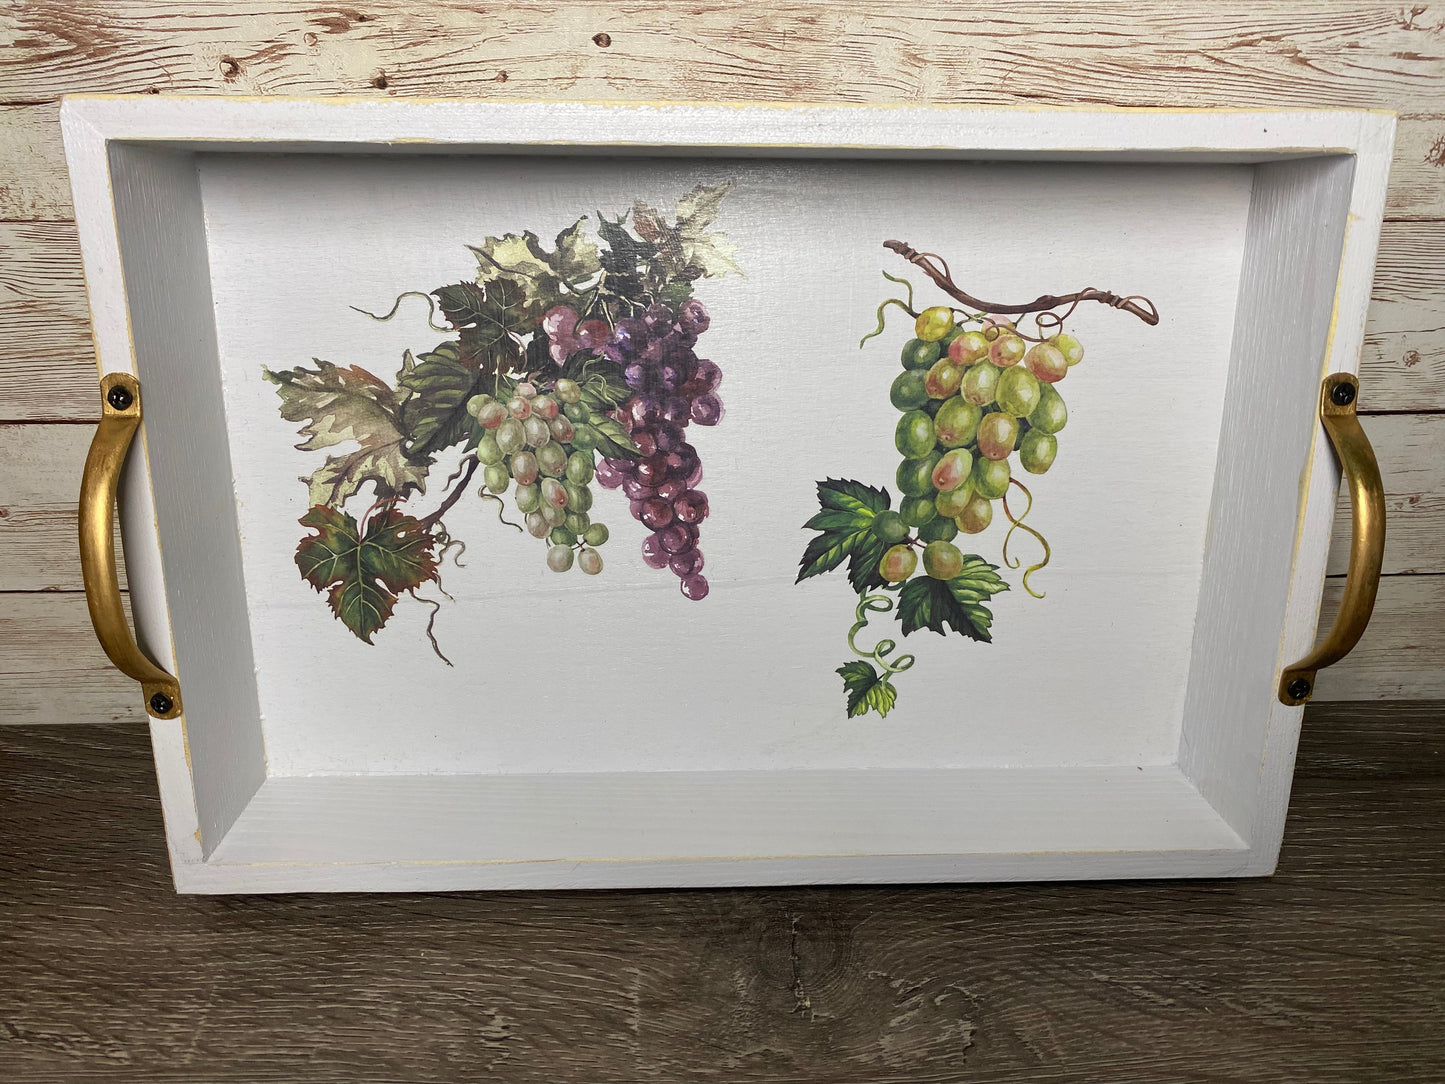 Grapes For Days Decorative Ottoman Tray